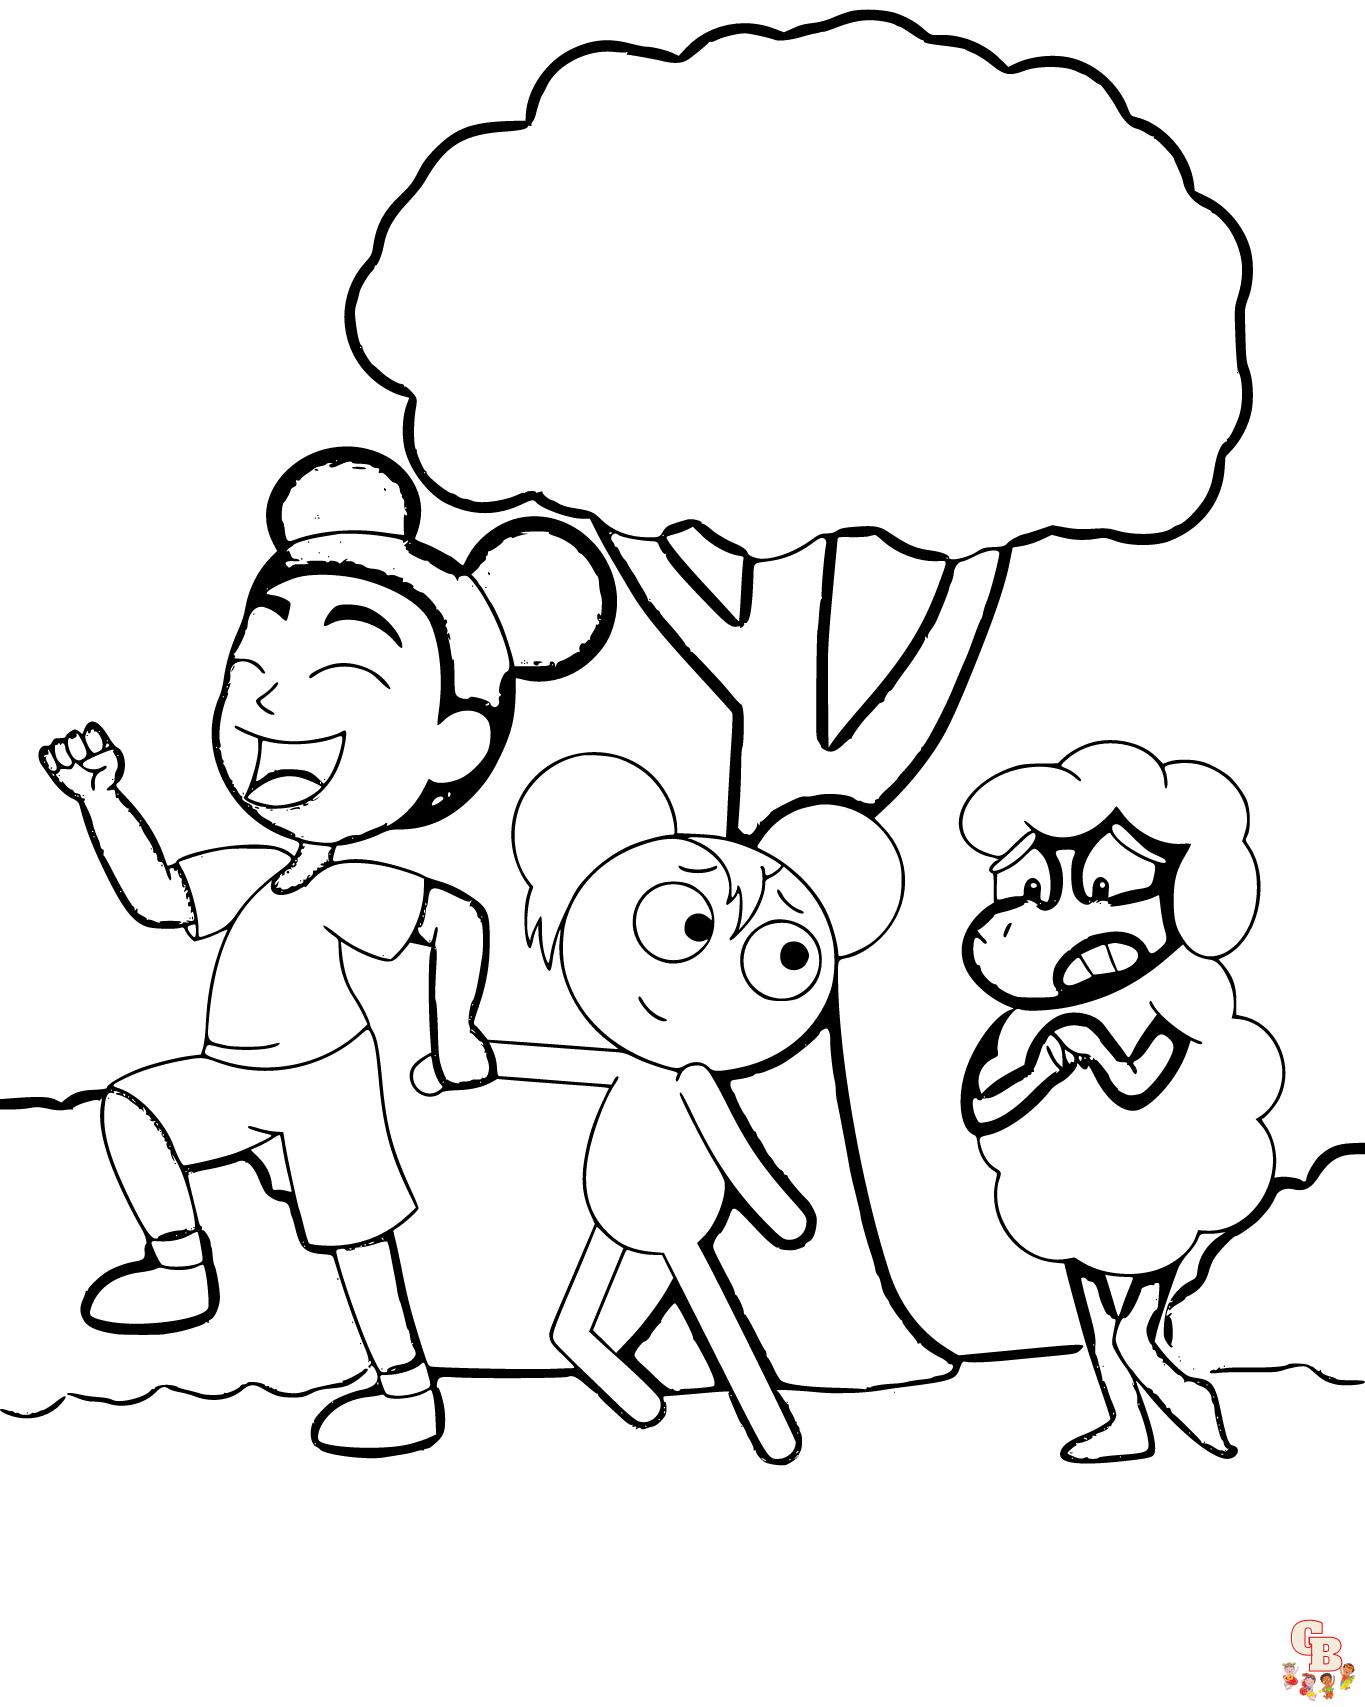 Amanda the Adventurer coloring pages easy